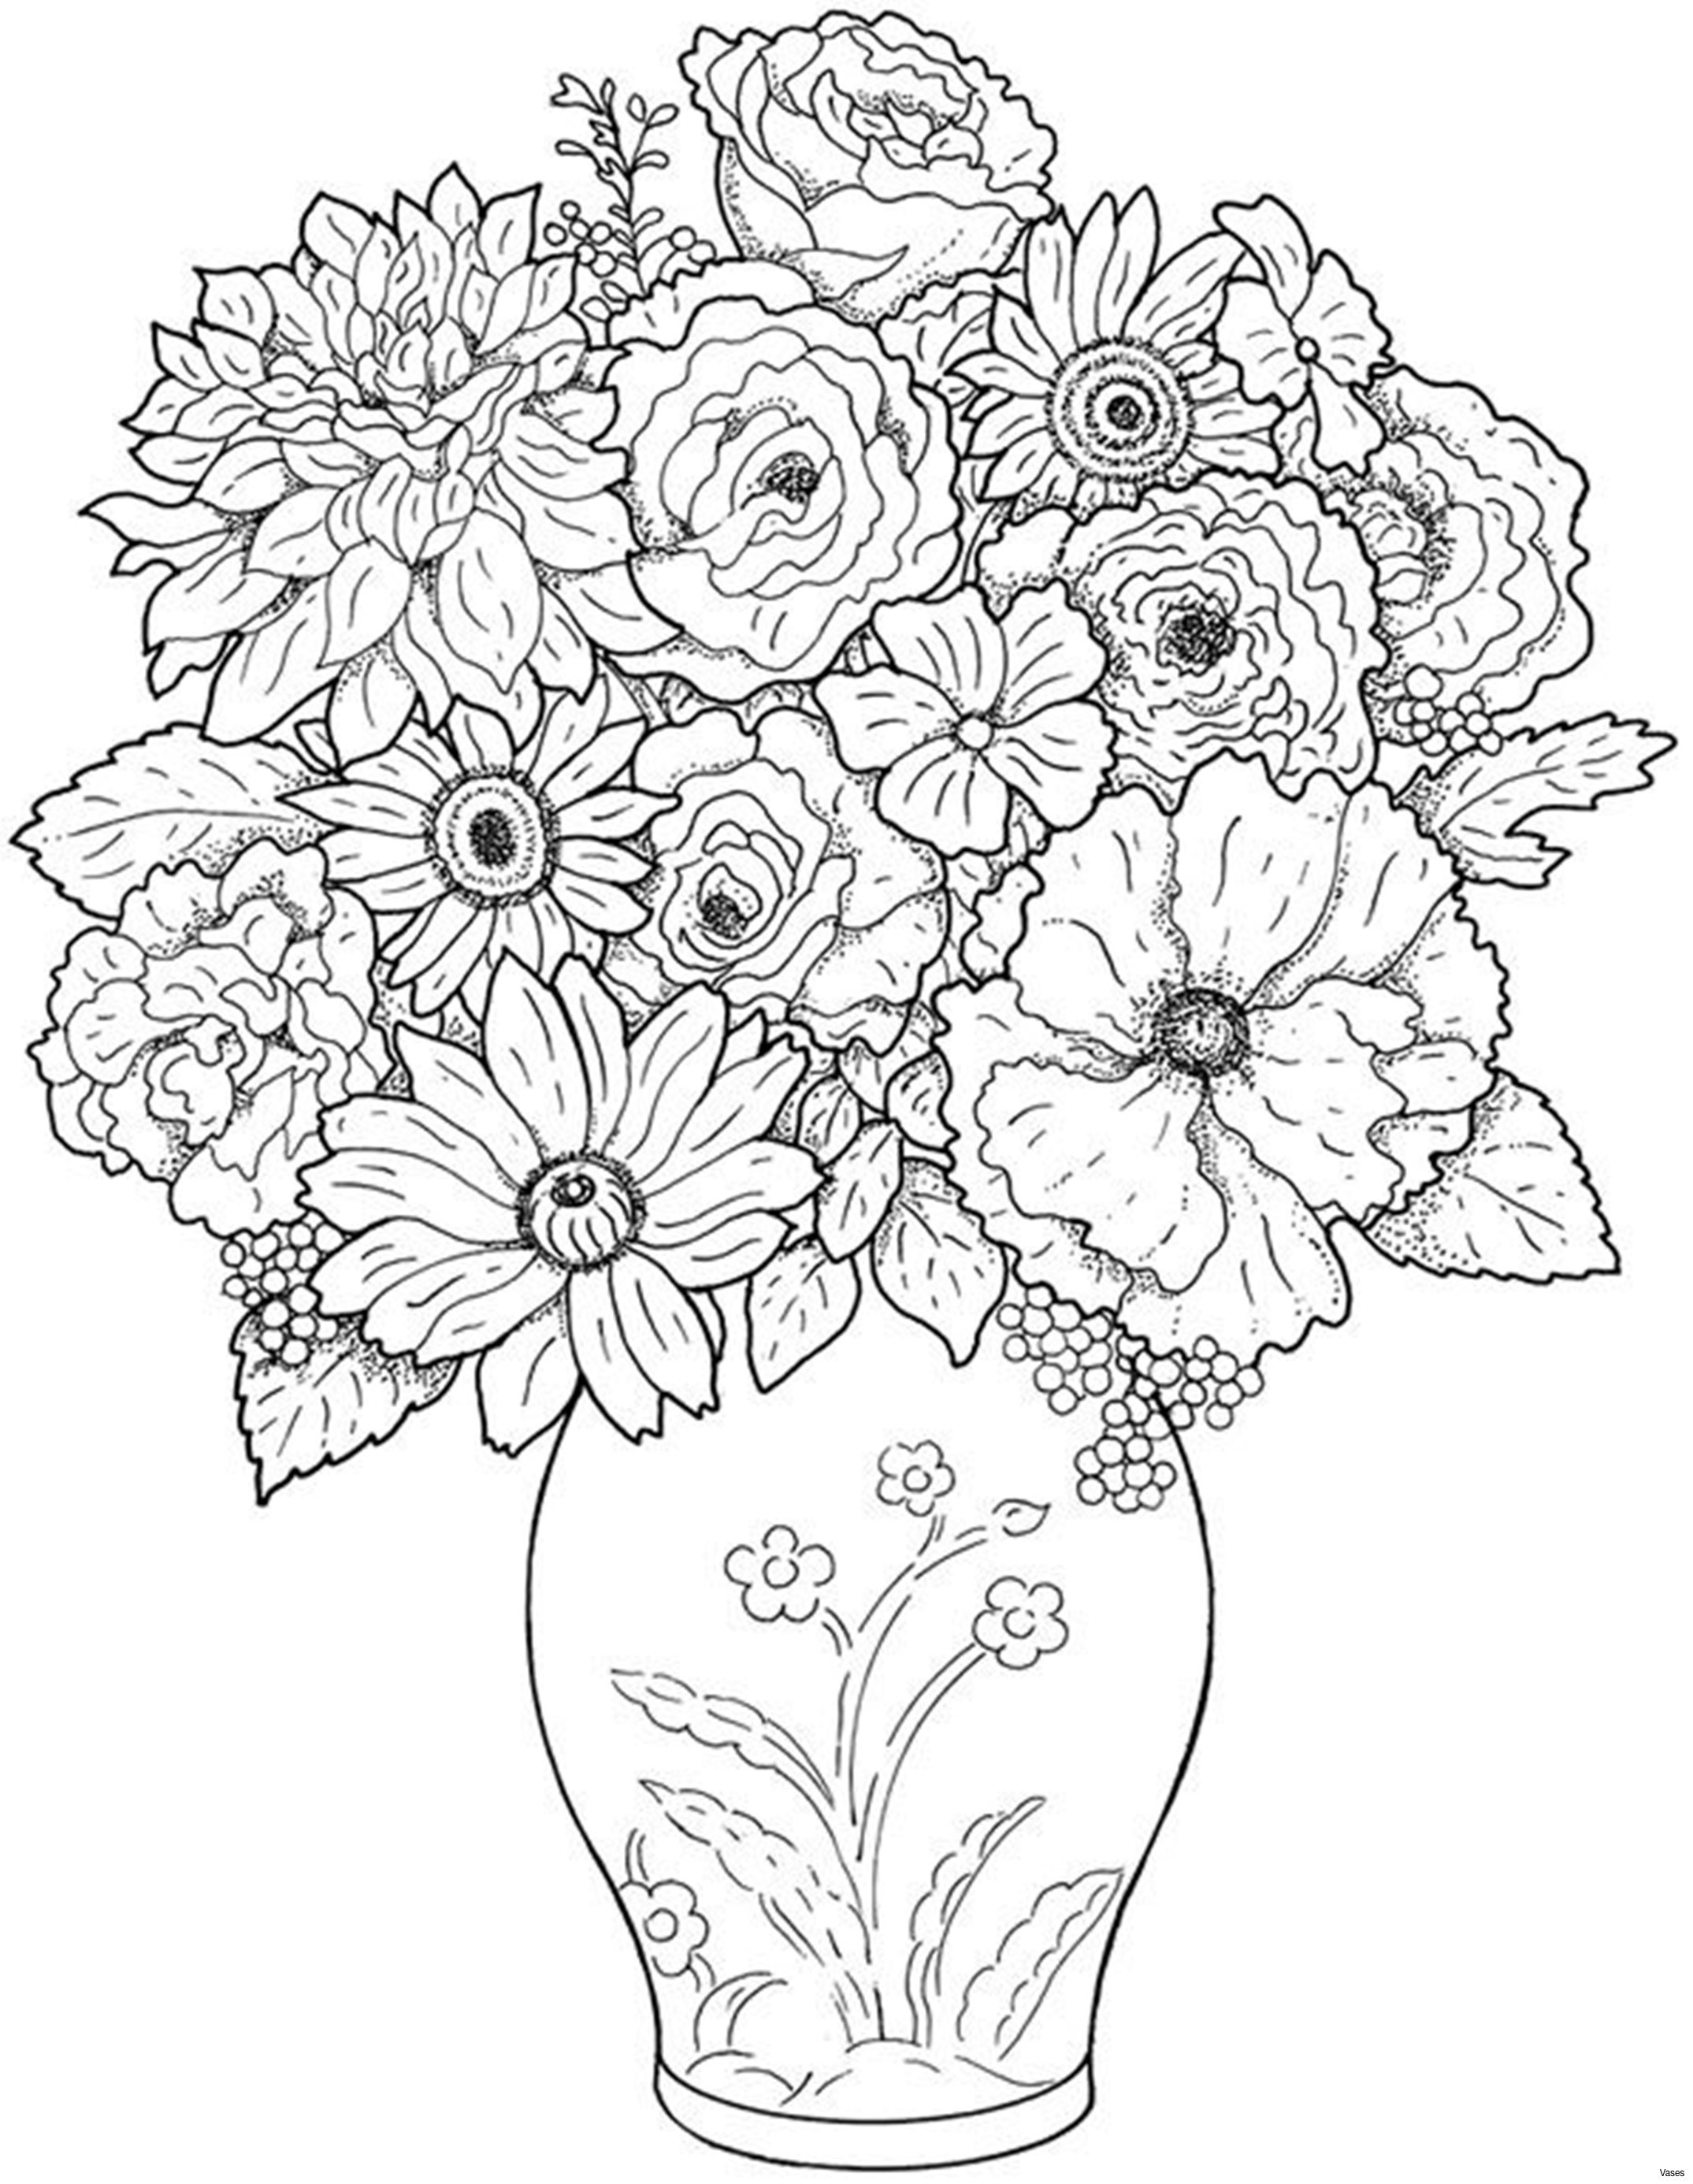 29 Famous Black and White Flower Vase 2024 free download black and white flower vase of white flower vase pics cool vases flower vase coloring page pages with white flower vase pics cool vases flower vase coloring page pages flowers in a top i